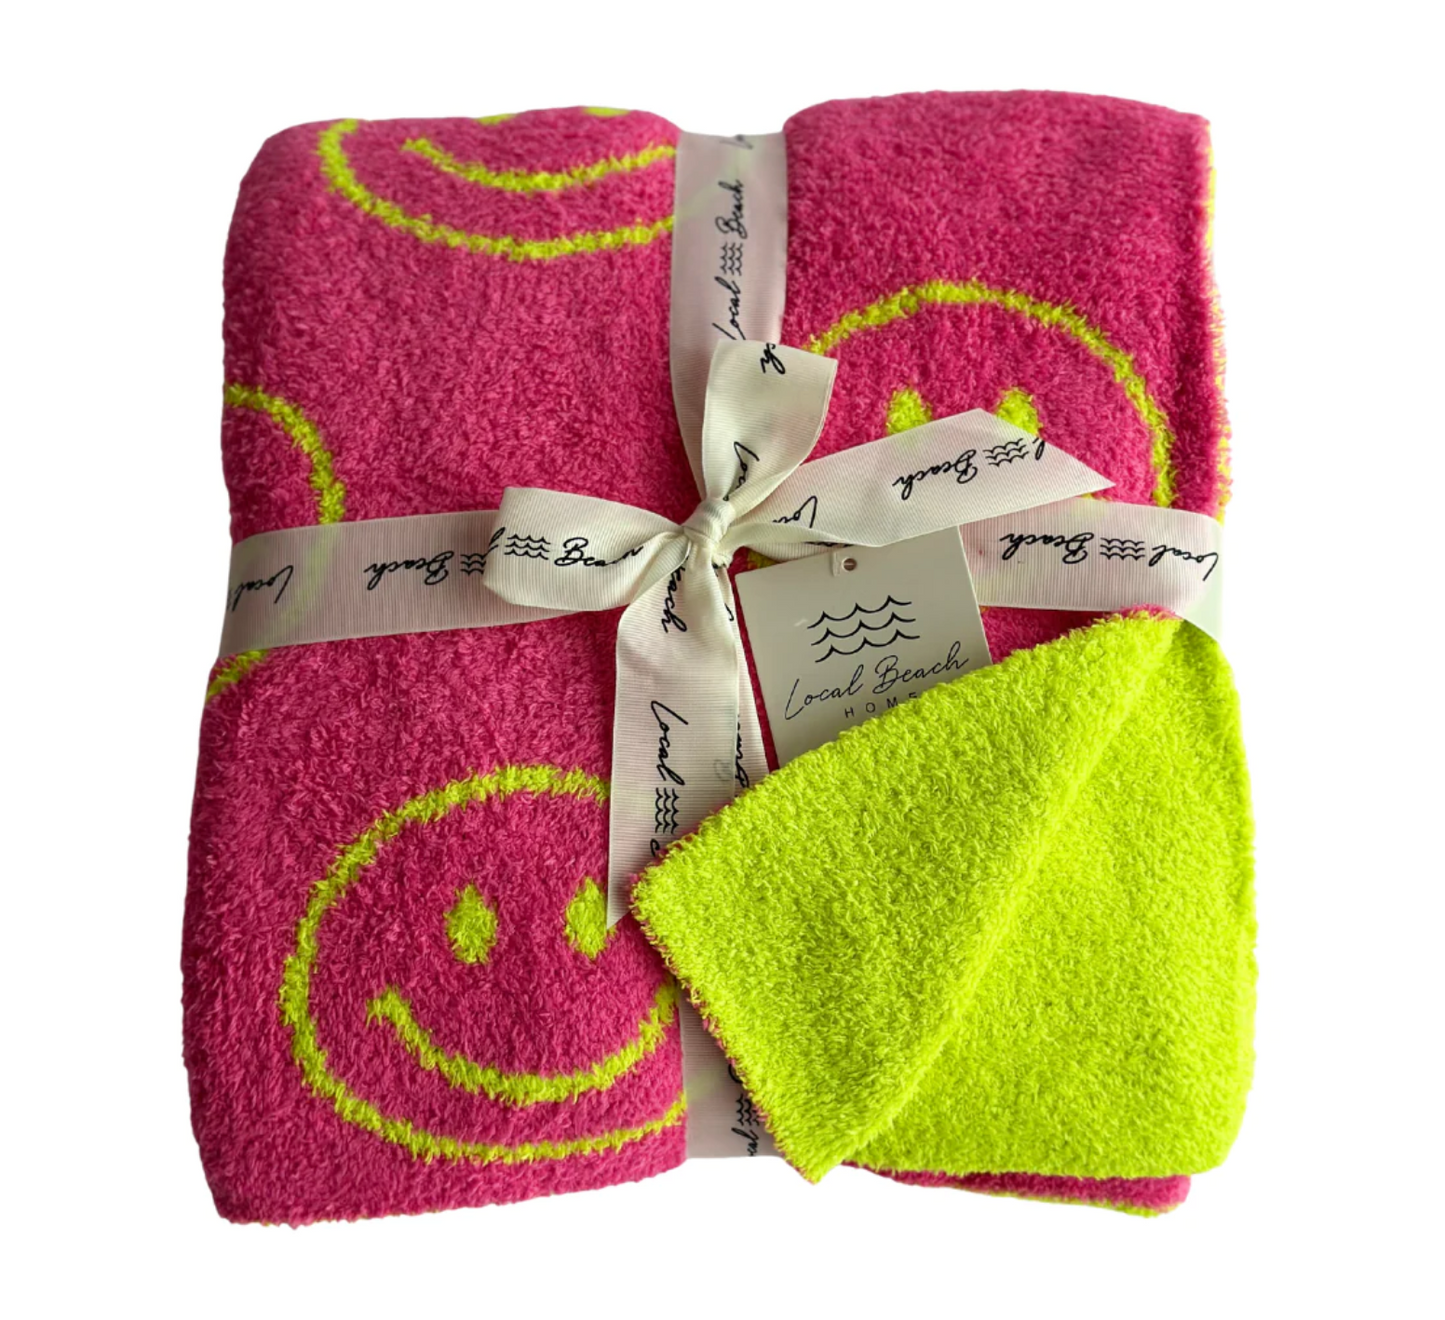 Load image into Gallery viewer, LUXE BABY BLANKET - SMILEY
